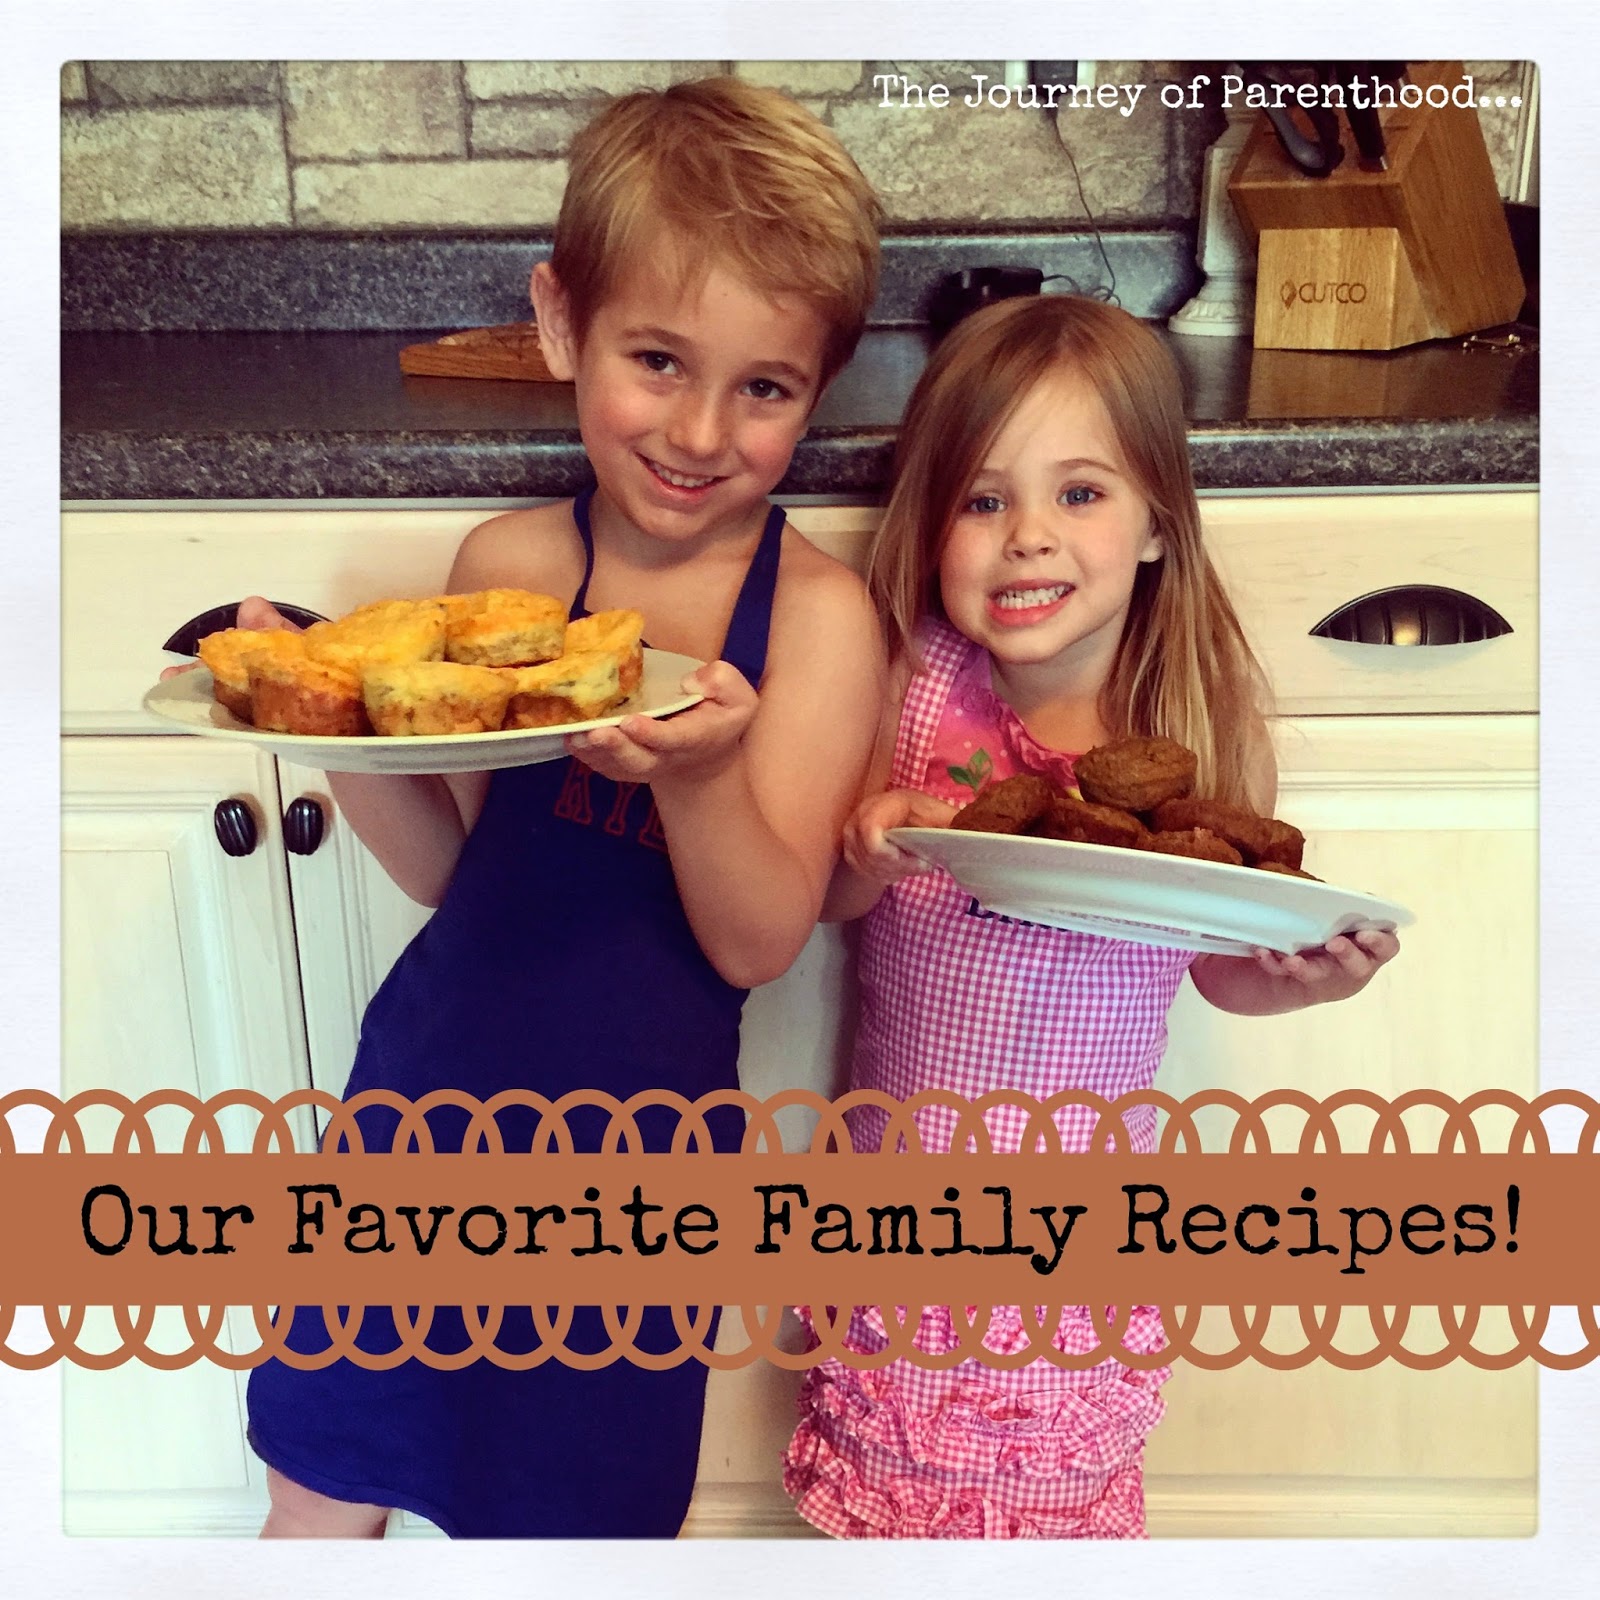 Our Favorite Recipes!